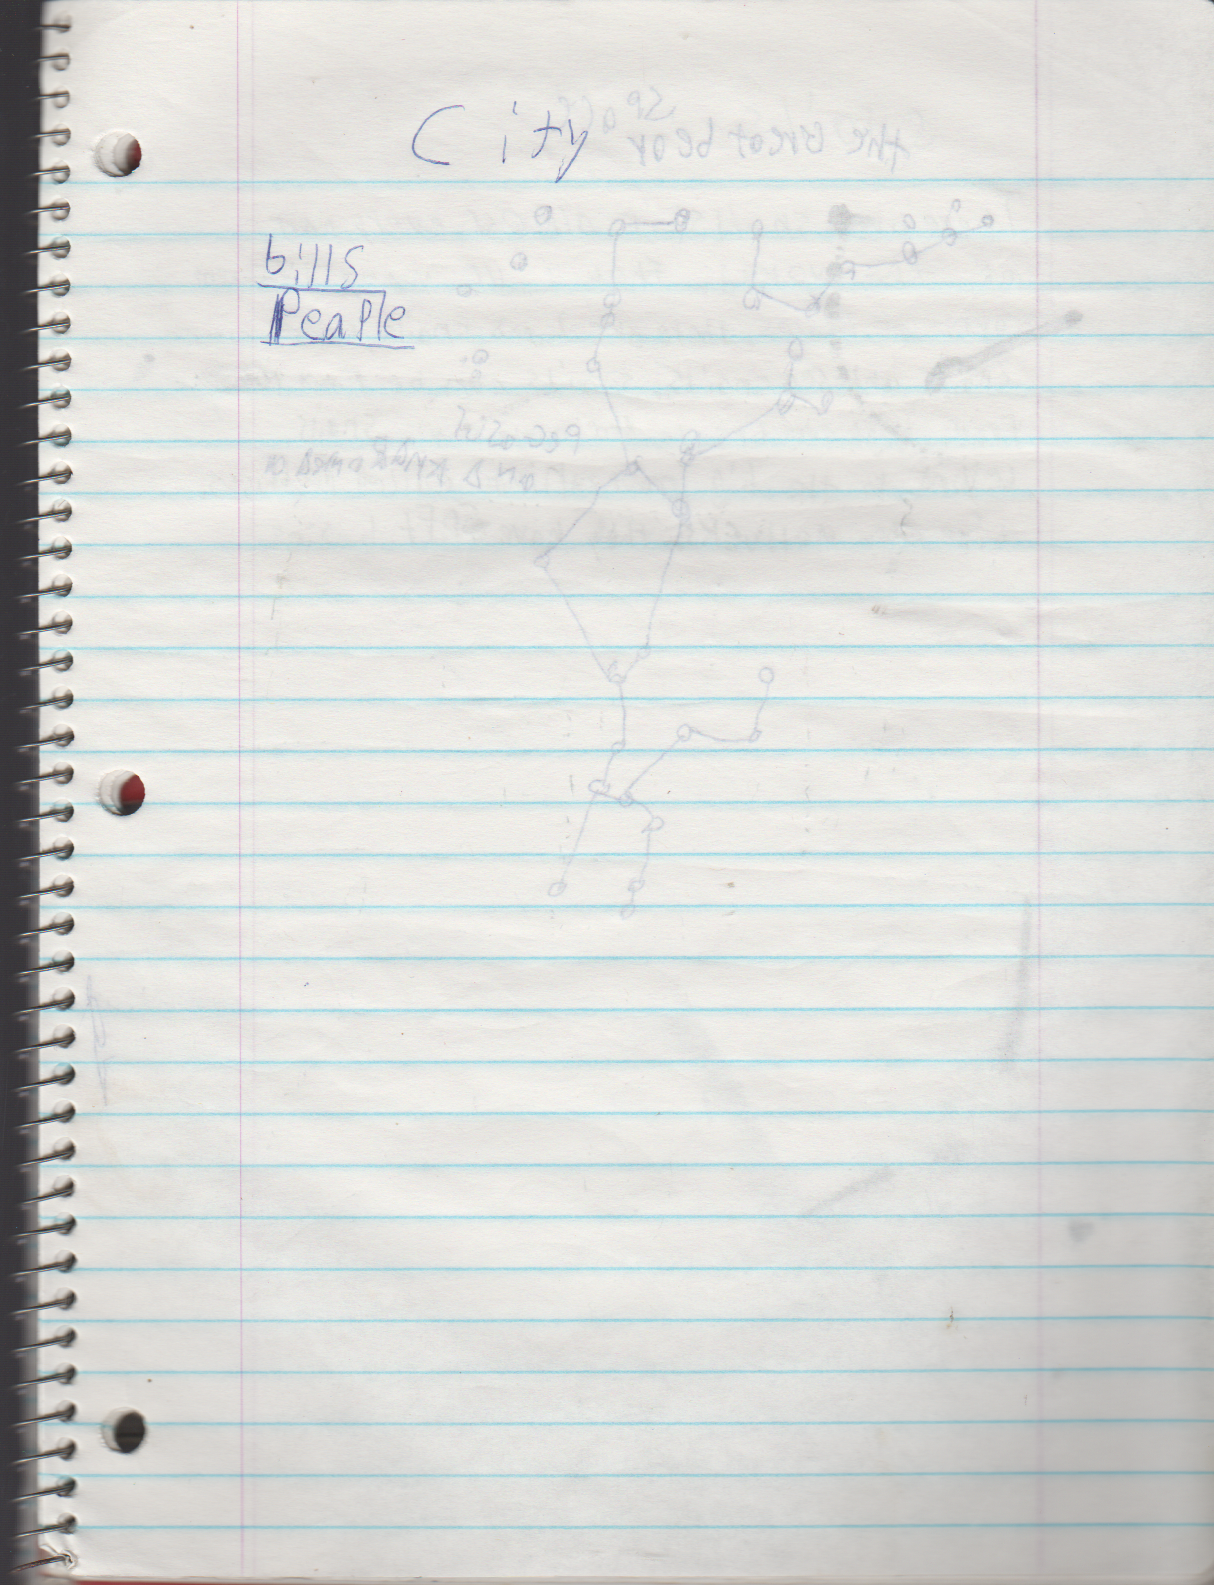 1996-08-18 - Saturday - 11 yr old Joey Arnold's School Book, dates through to 1998 apx, mostly 96, Writings, Drawings, Etc-037.png